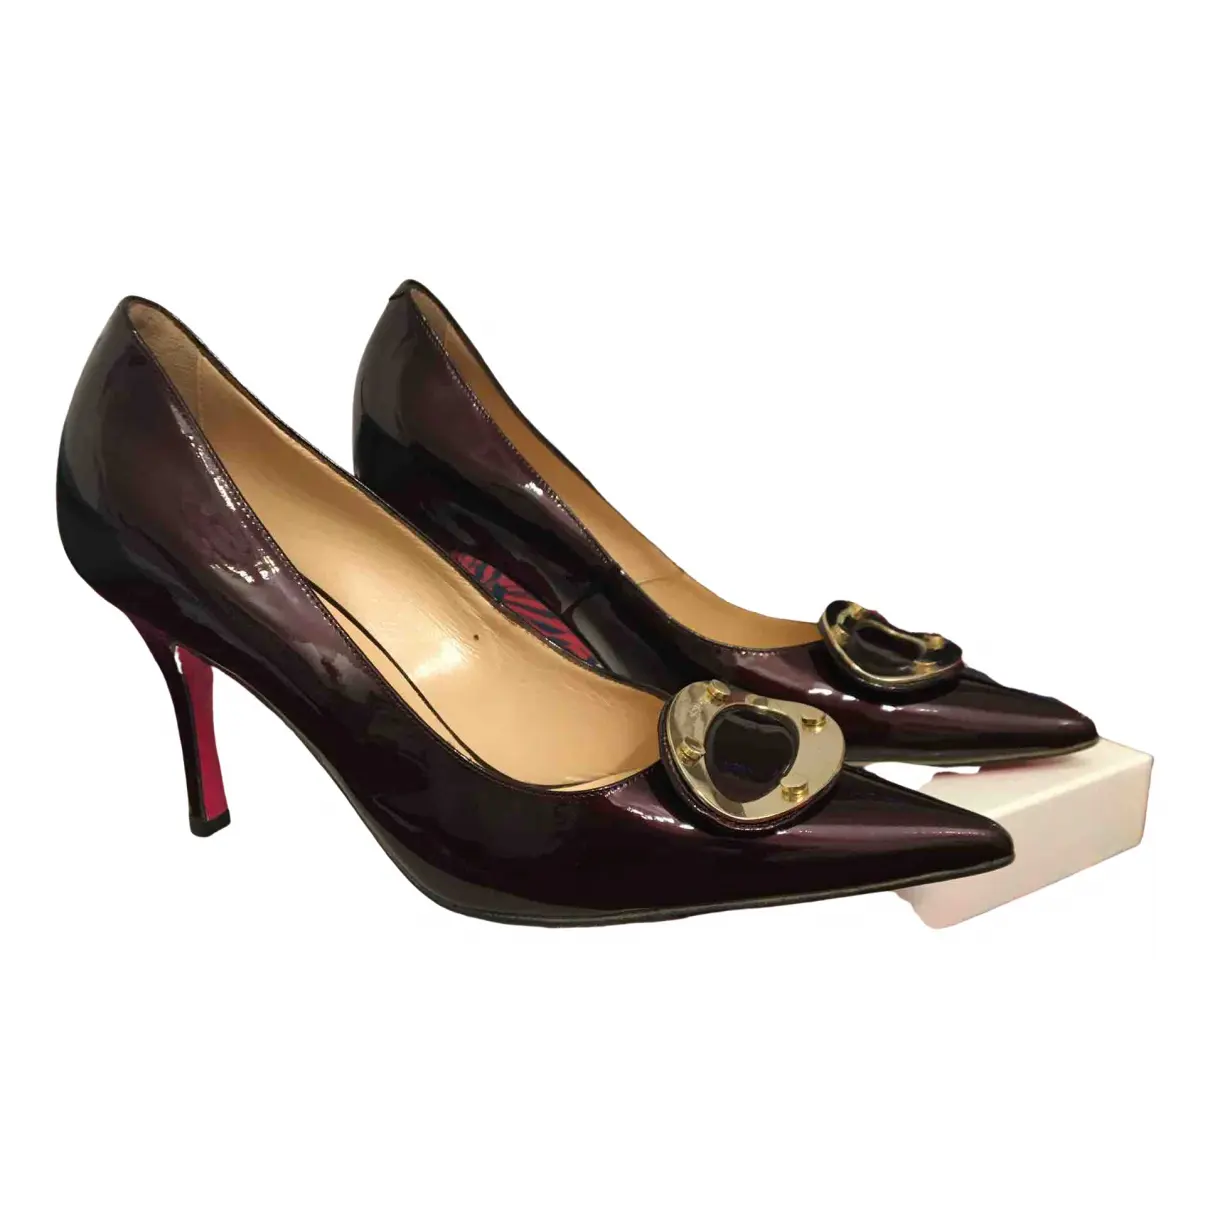 Patent leather heels Luciano Padovan